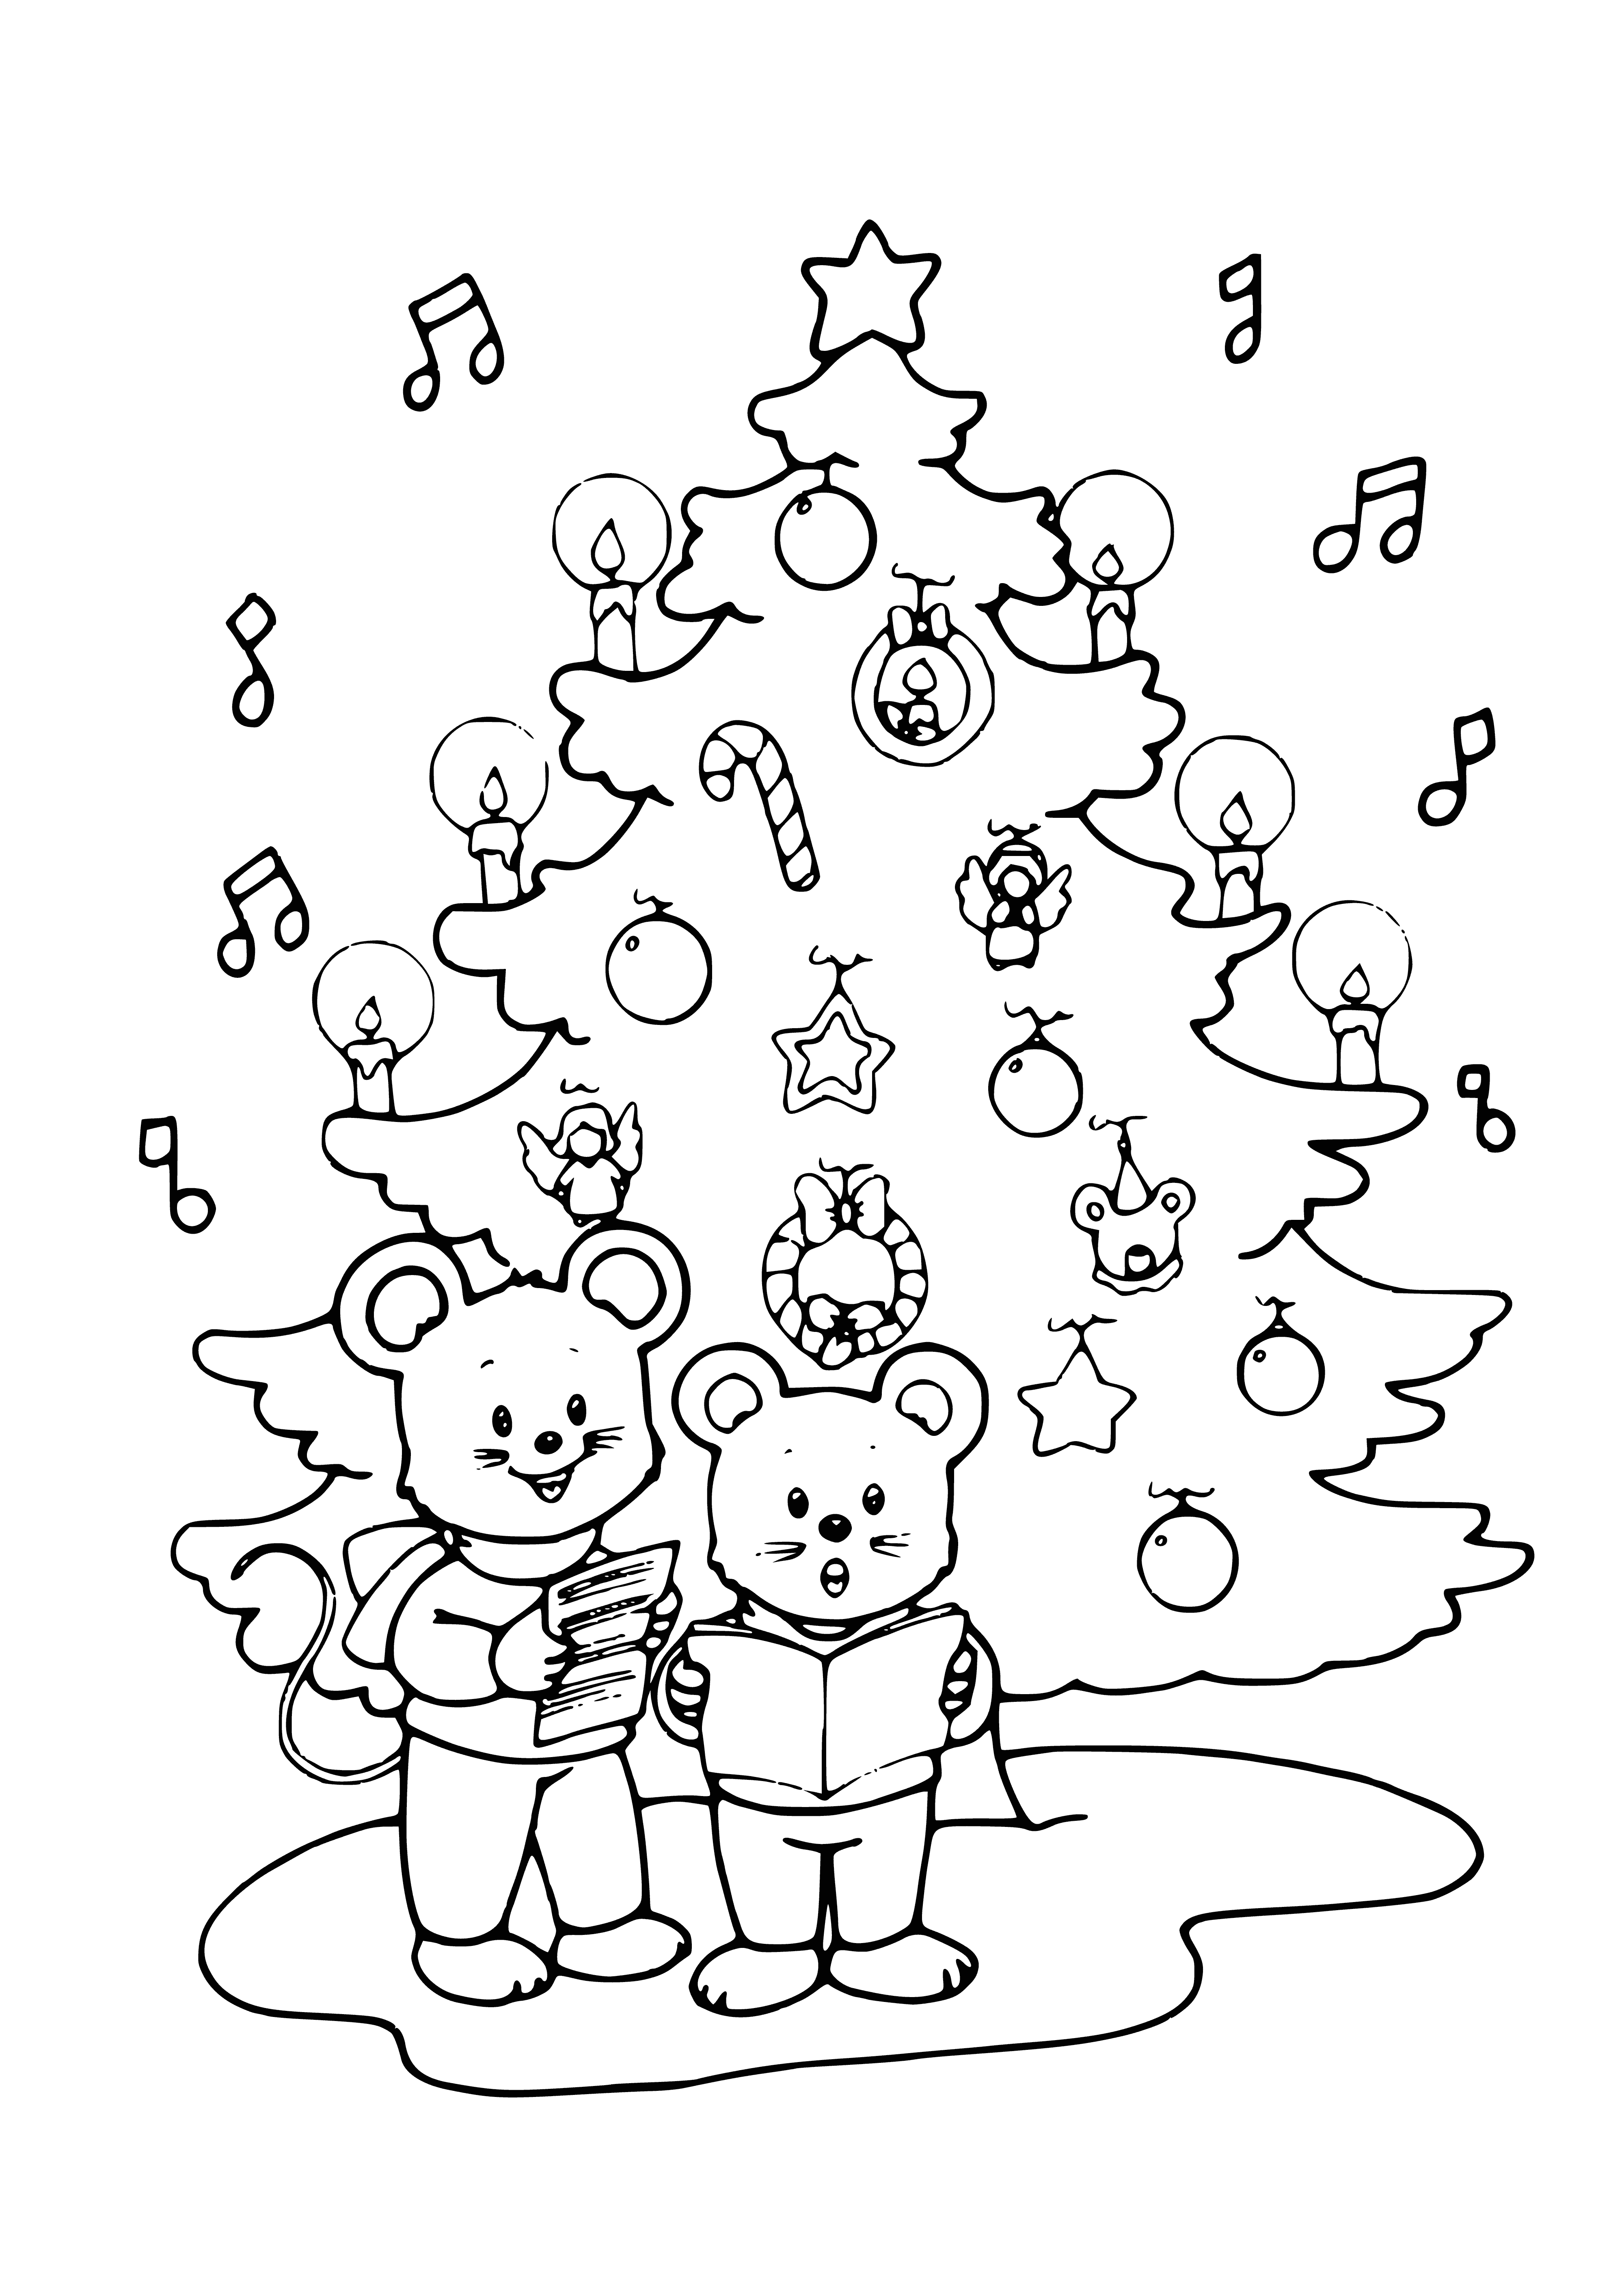 Rats running/playing by a tree in a coloring page - small & brown.